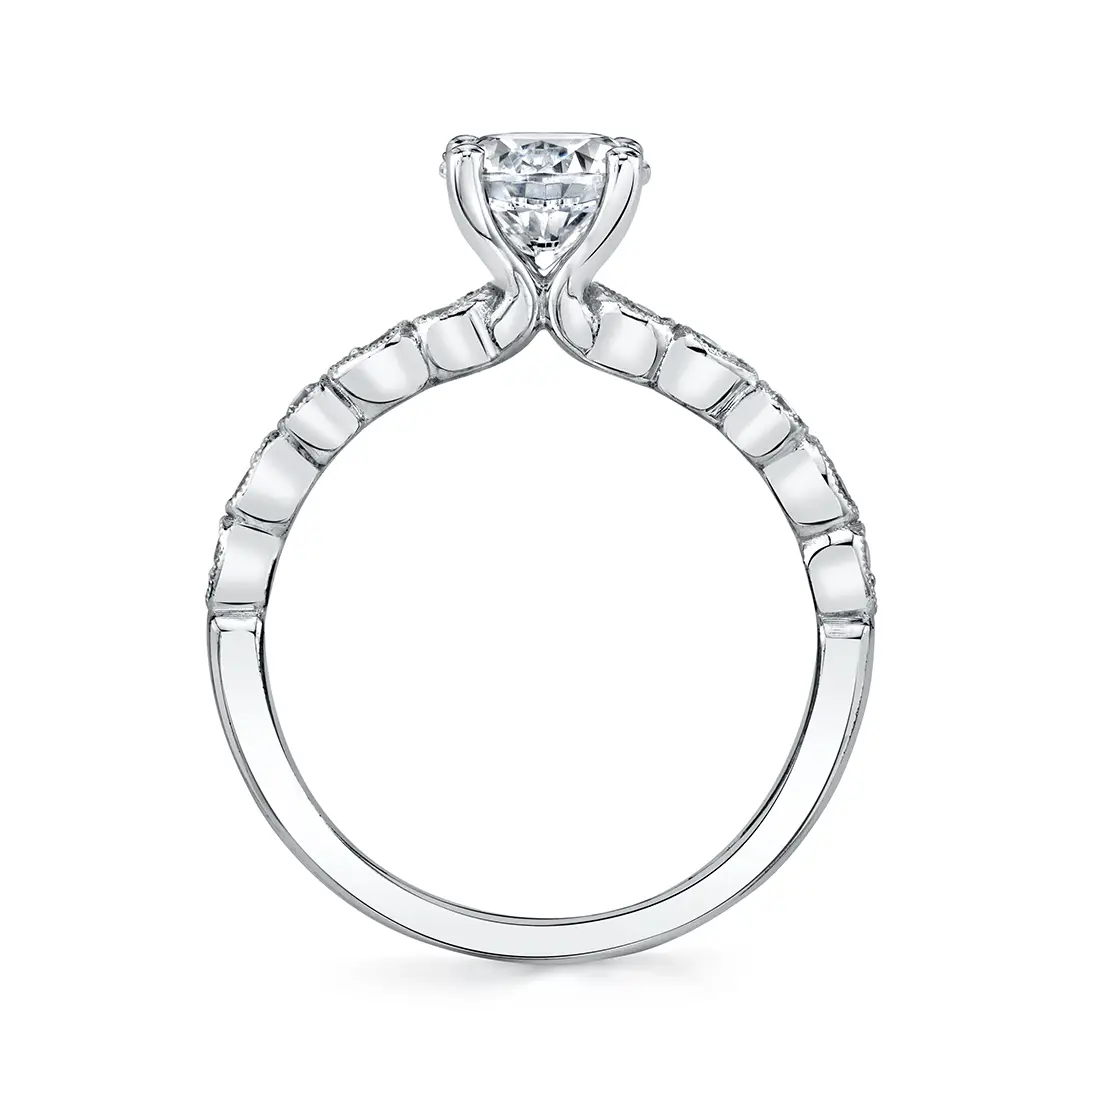 Profile image of a Unique Stackable Engagement Ring